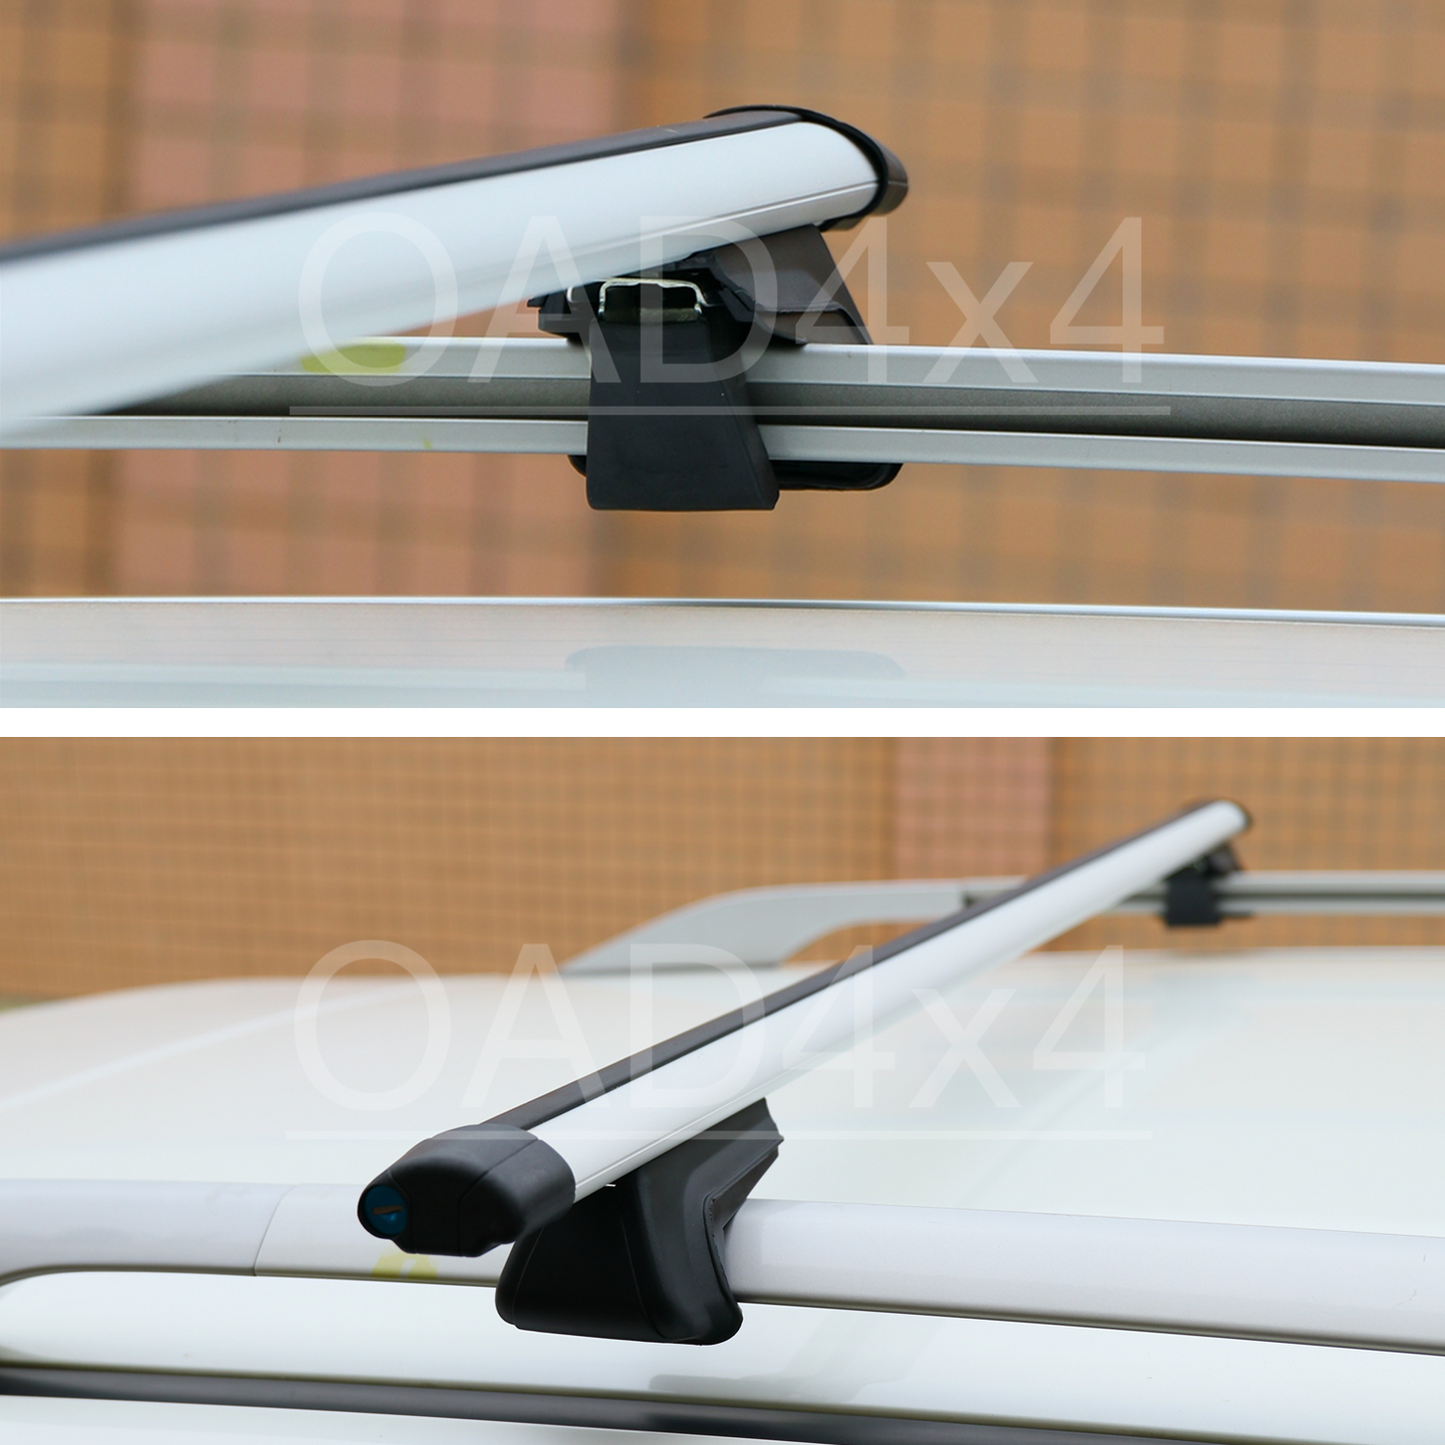 OAD 1 pair Aluminum Silver Cross Bar Roof Racks Baggage holder for Volvo XC90 D5 03-16 with raised roof rail